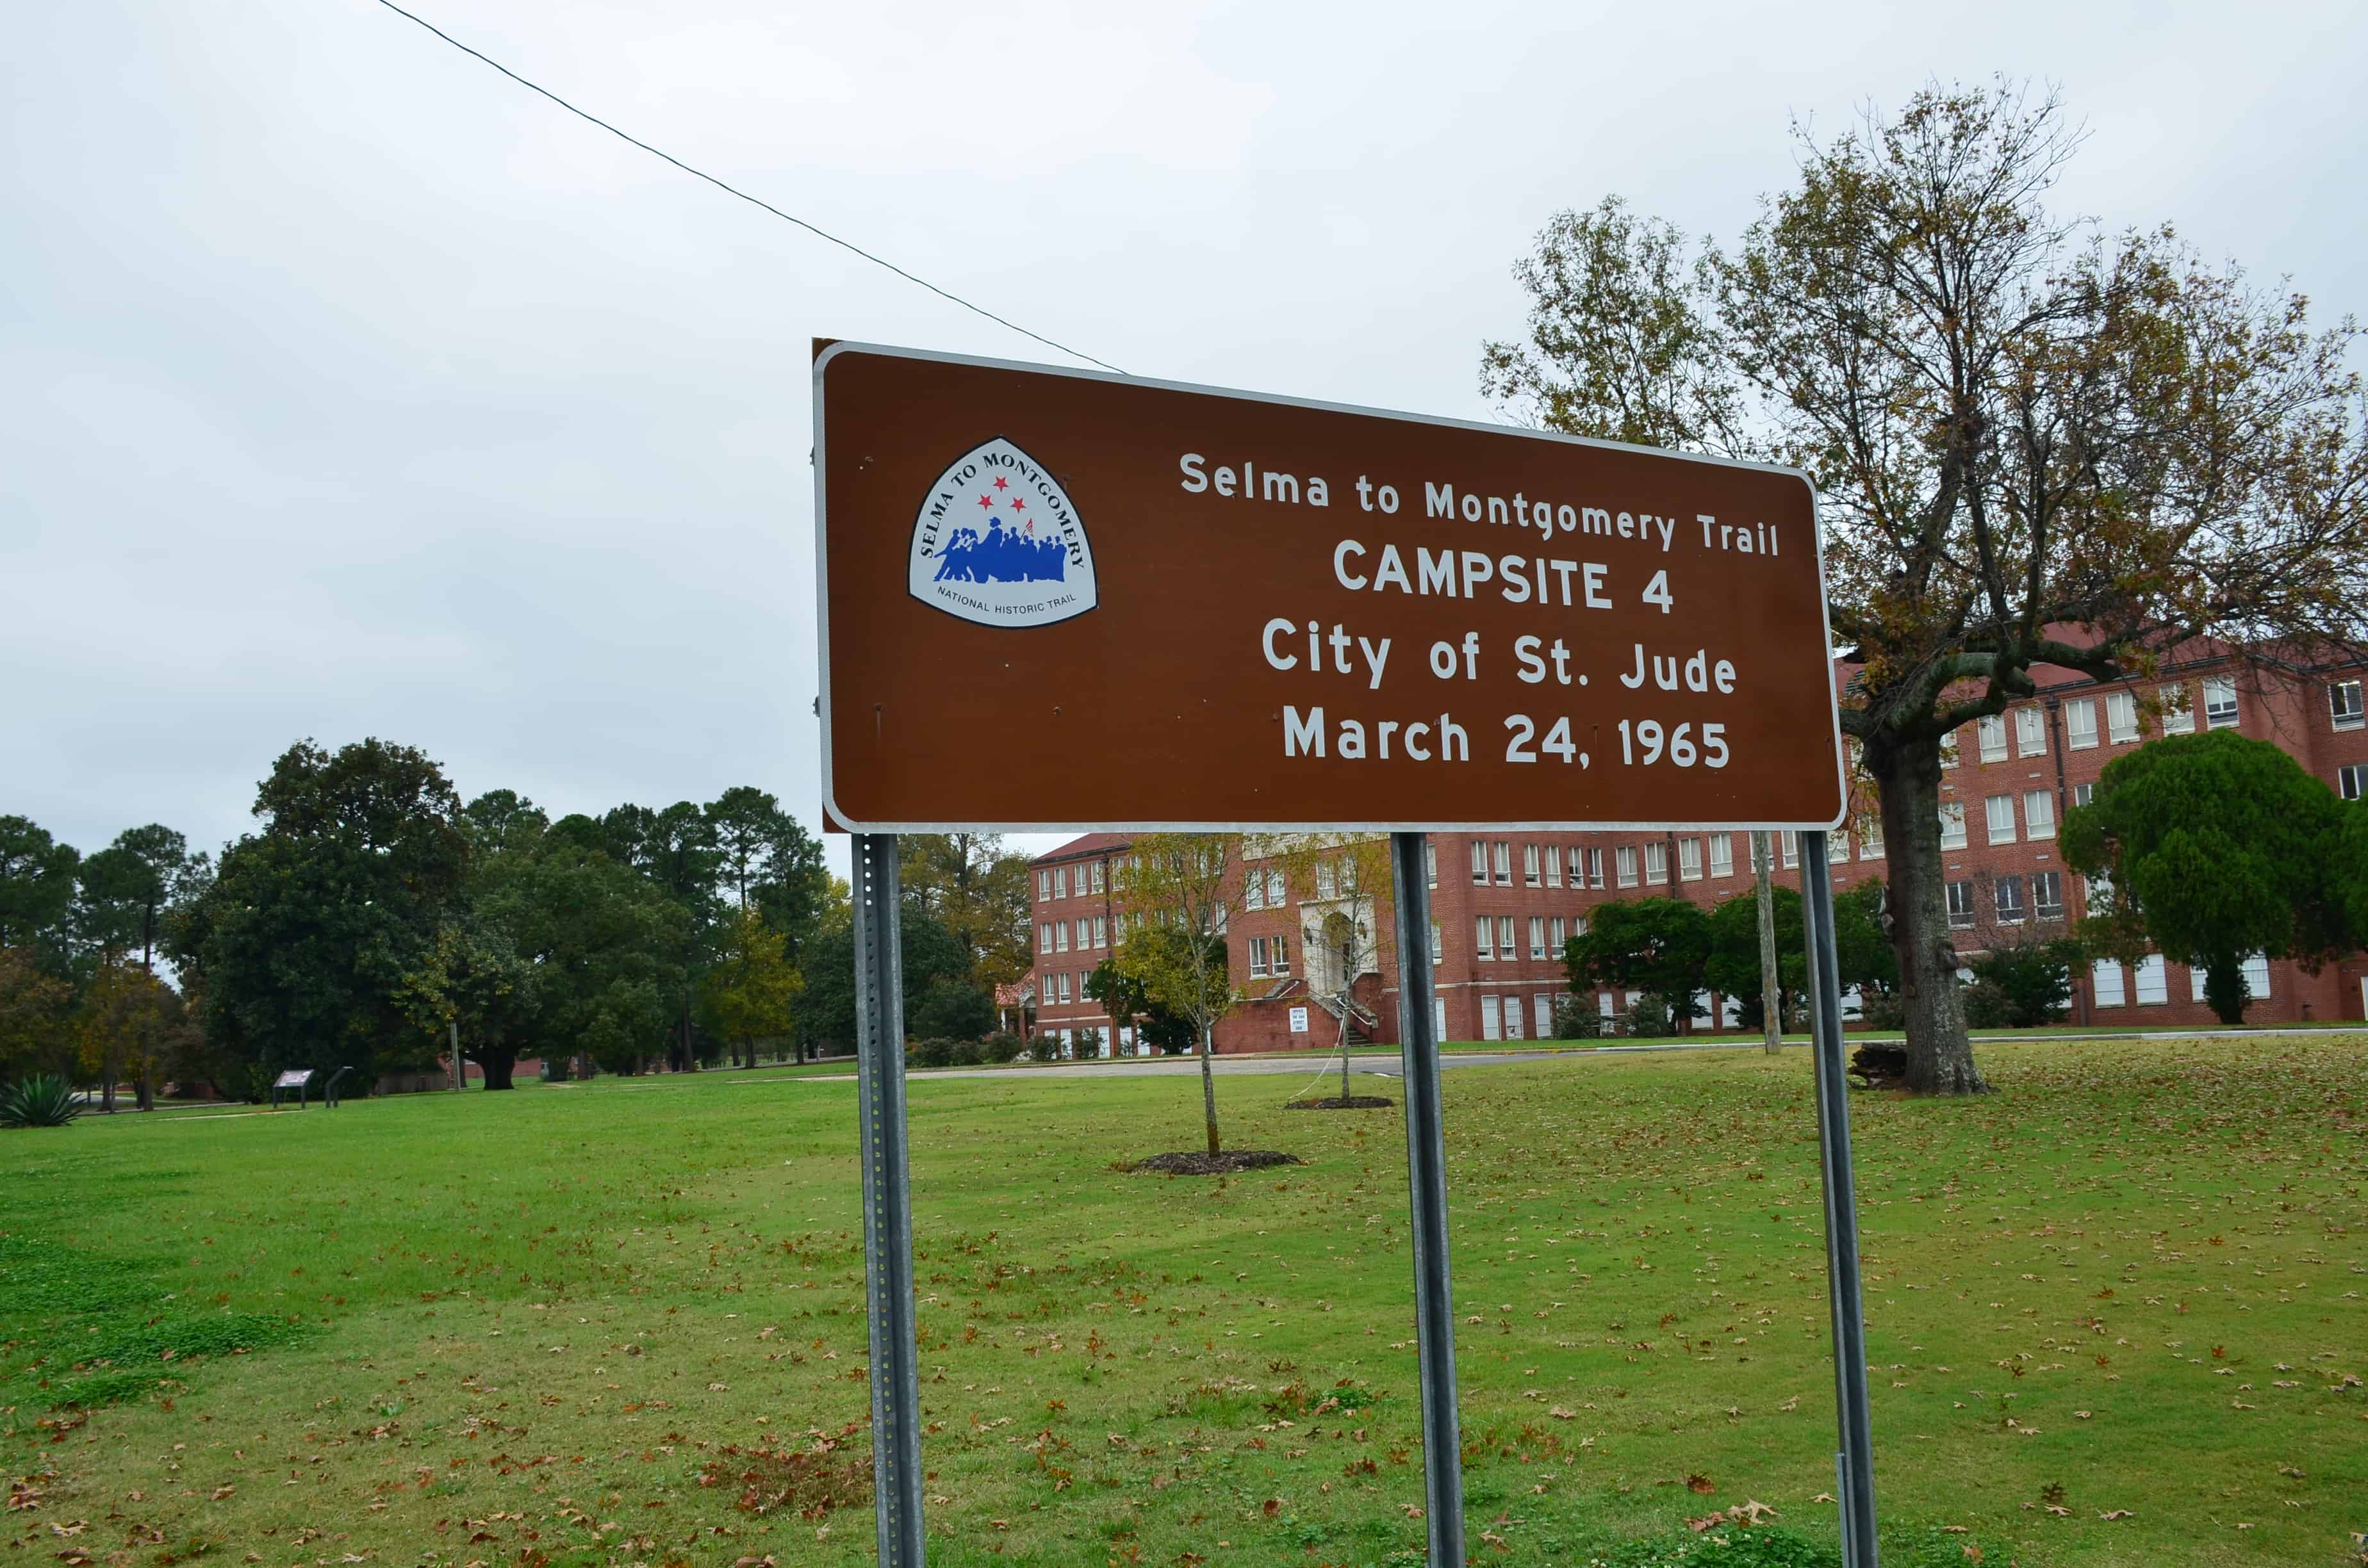 Campsite #4 - City of St. Jude on the Selma to Montgomery National Historic Trail in Alabama